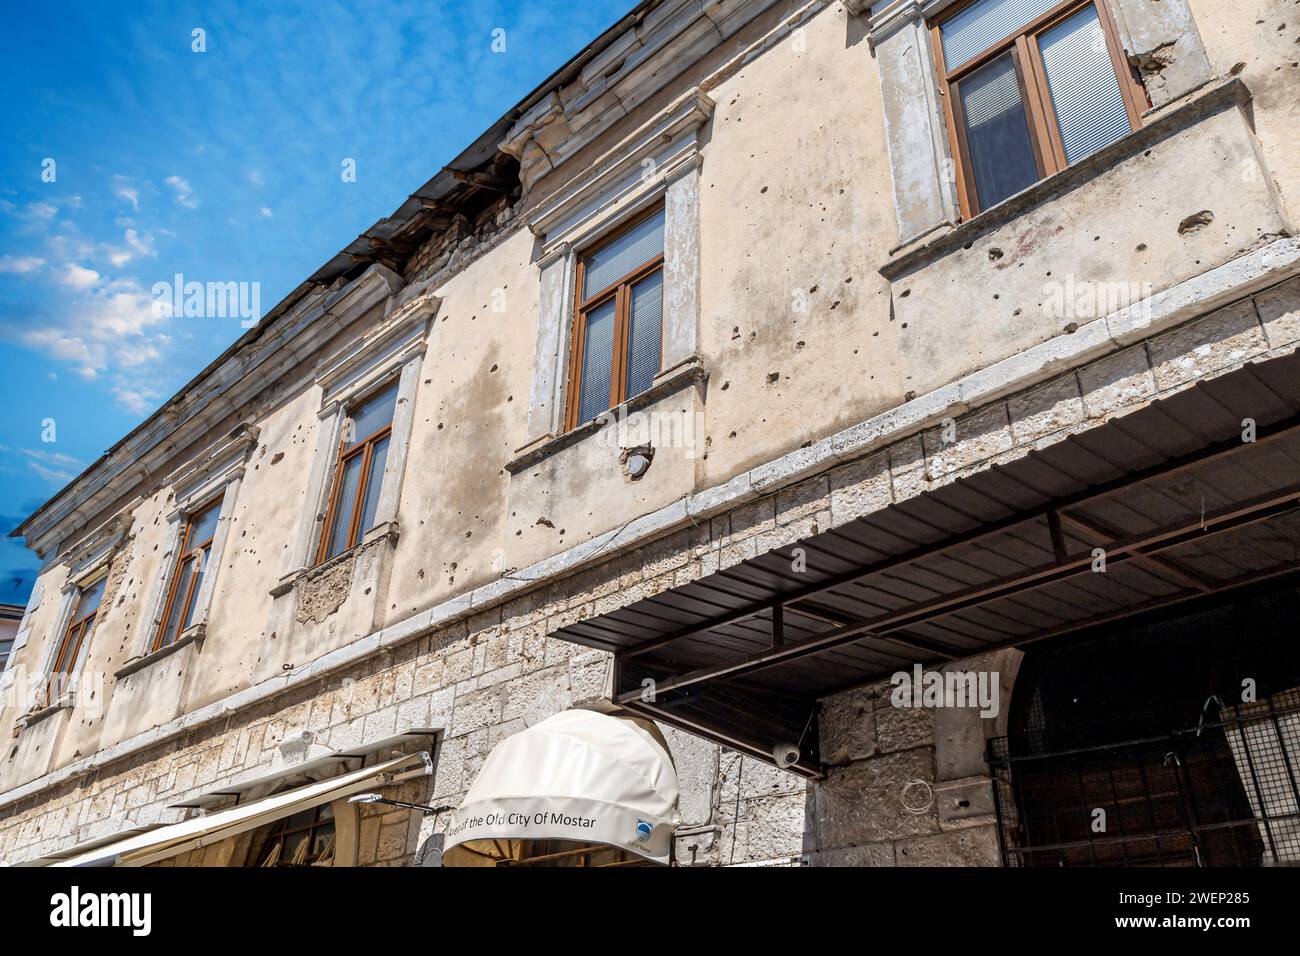 MOSTAR, BOSNIA AND HERZEGOVINA - AUGUST 17, 2022: Bullet holes in a house facade of one abandoned building, caused by gunfire during Bosnian War (1992 Stock Photo